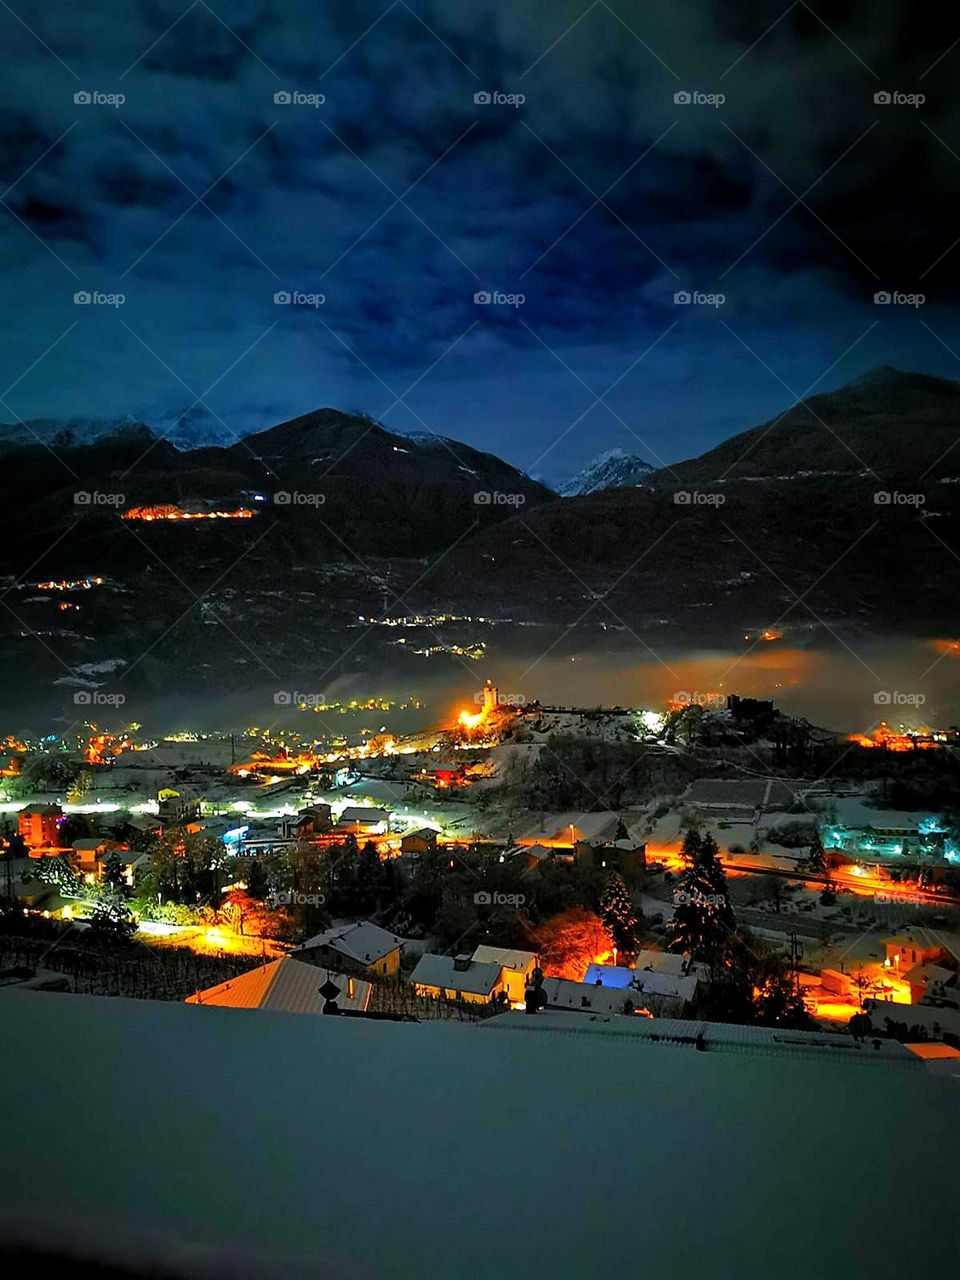 Winter fairy tale. Top view of a small town. Small city lights. The city is surrounded by mountains. Waiting for christmas